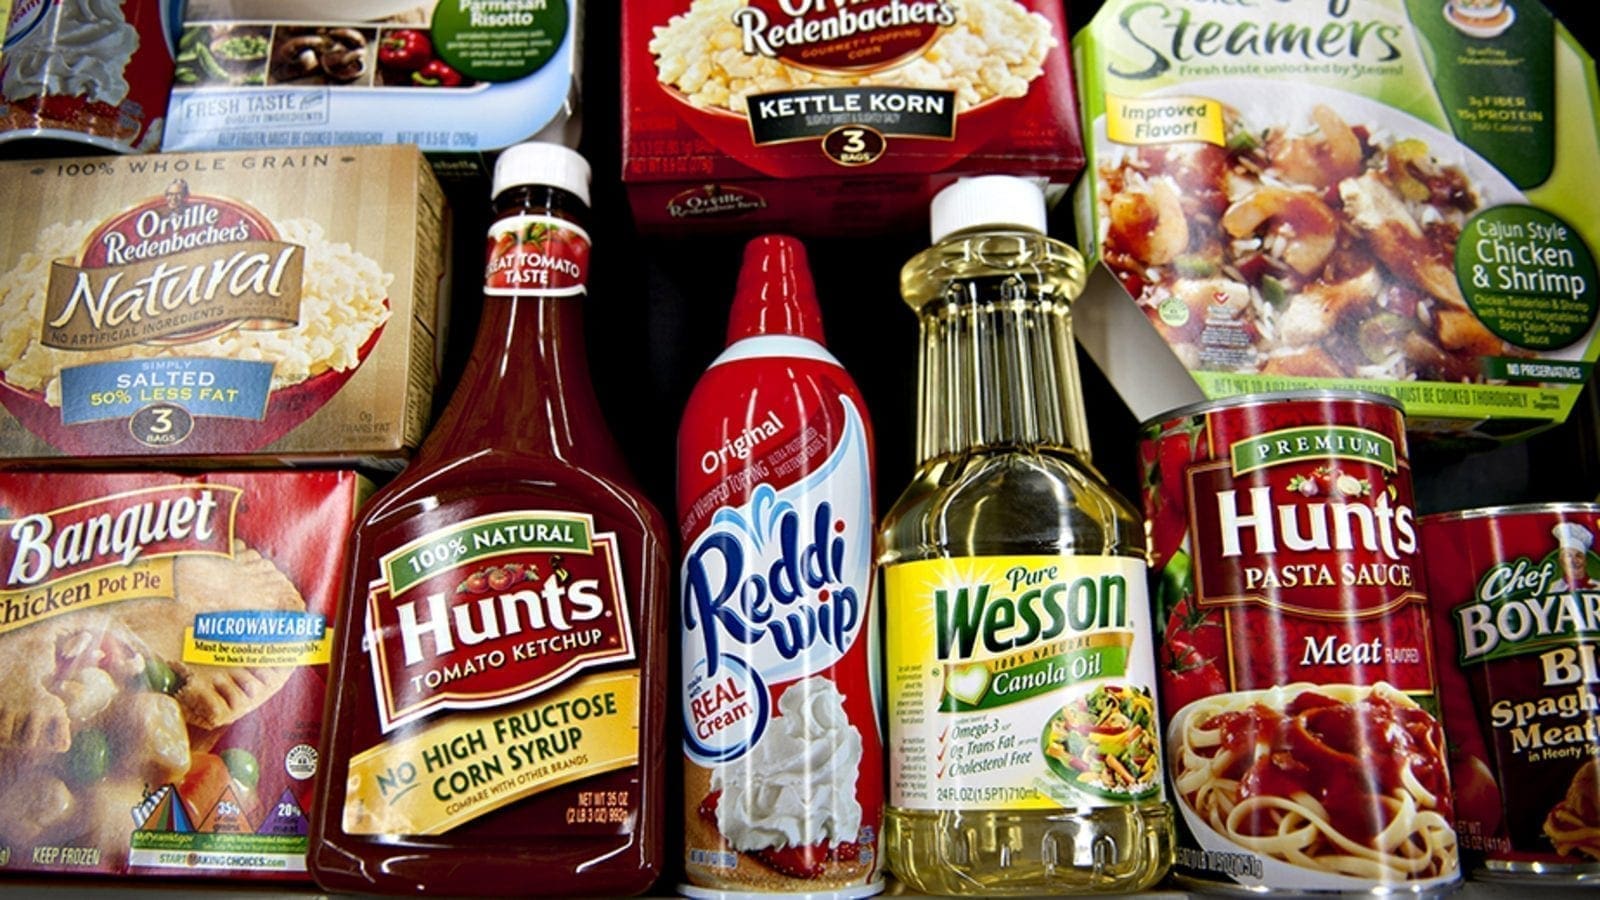 Conagra Brands lowers full year profit expectations amid rising inflation in the US